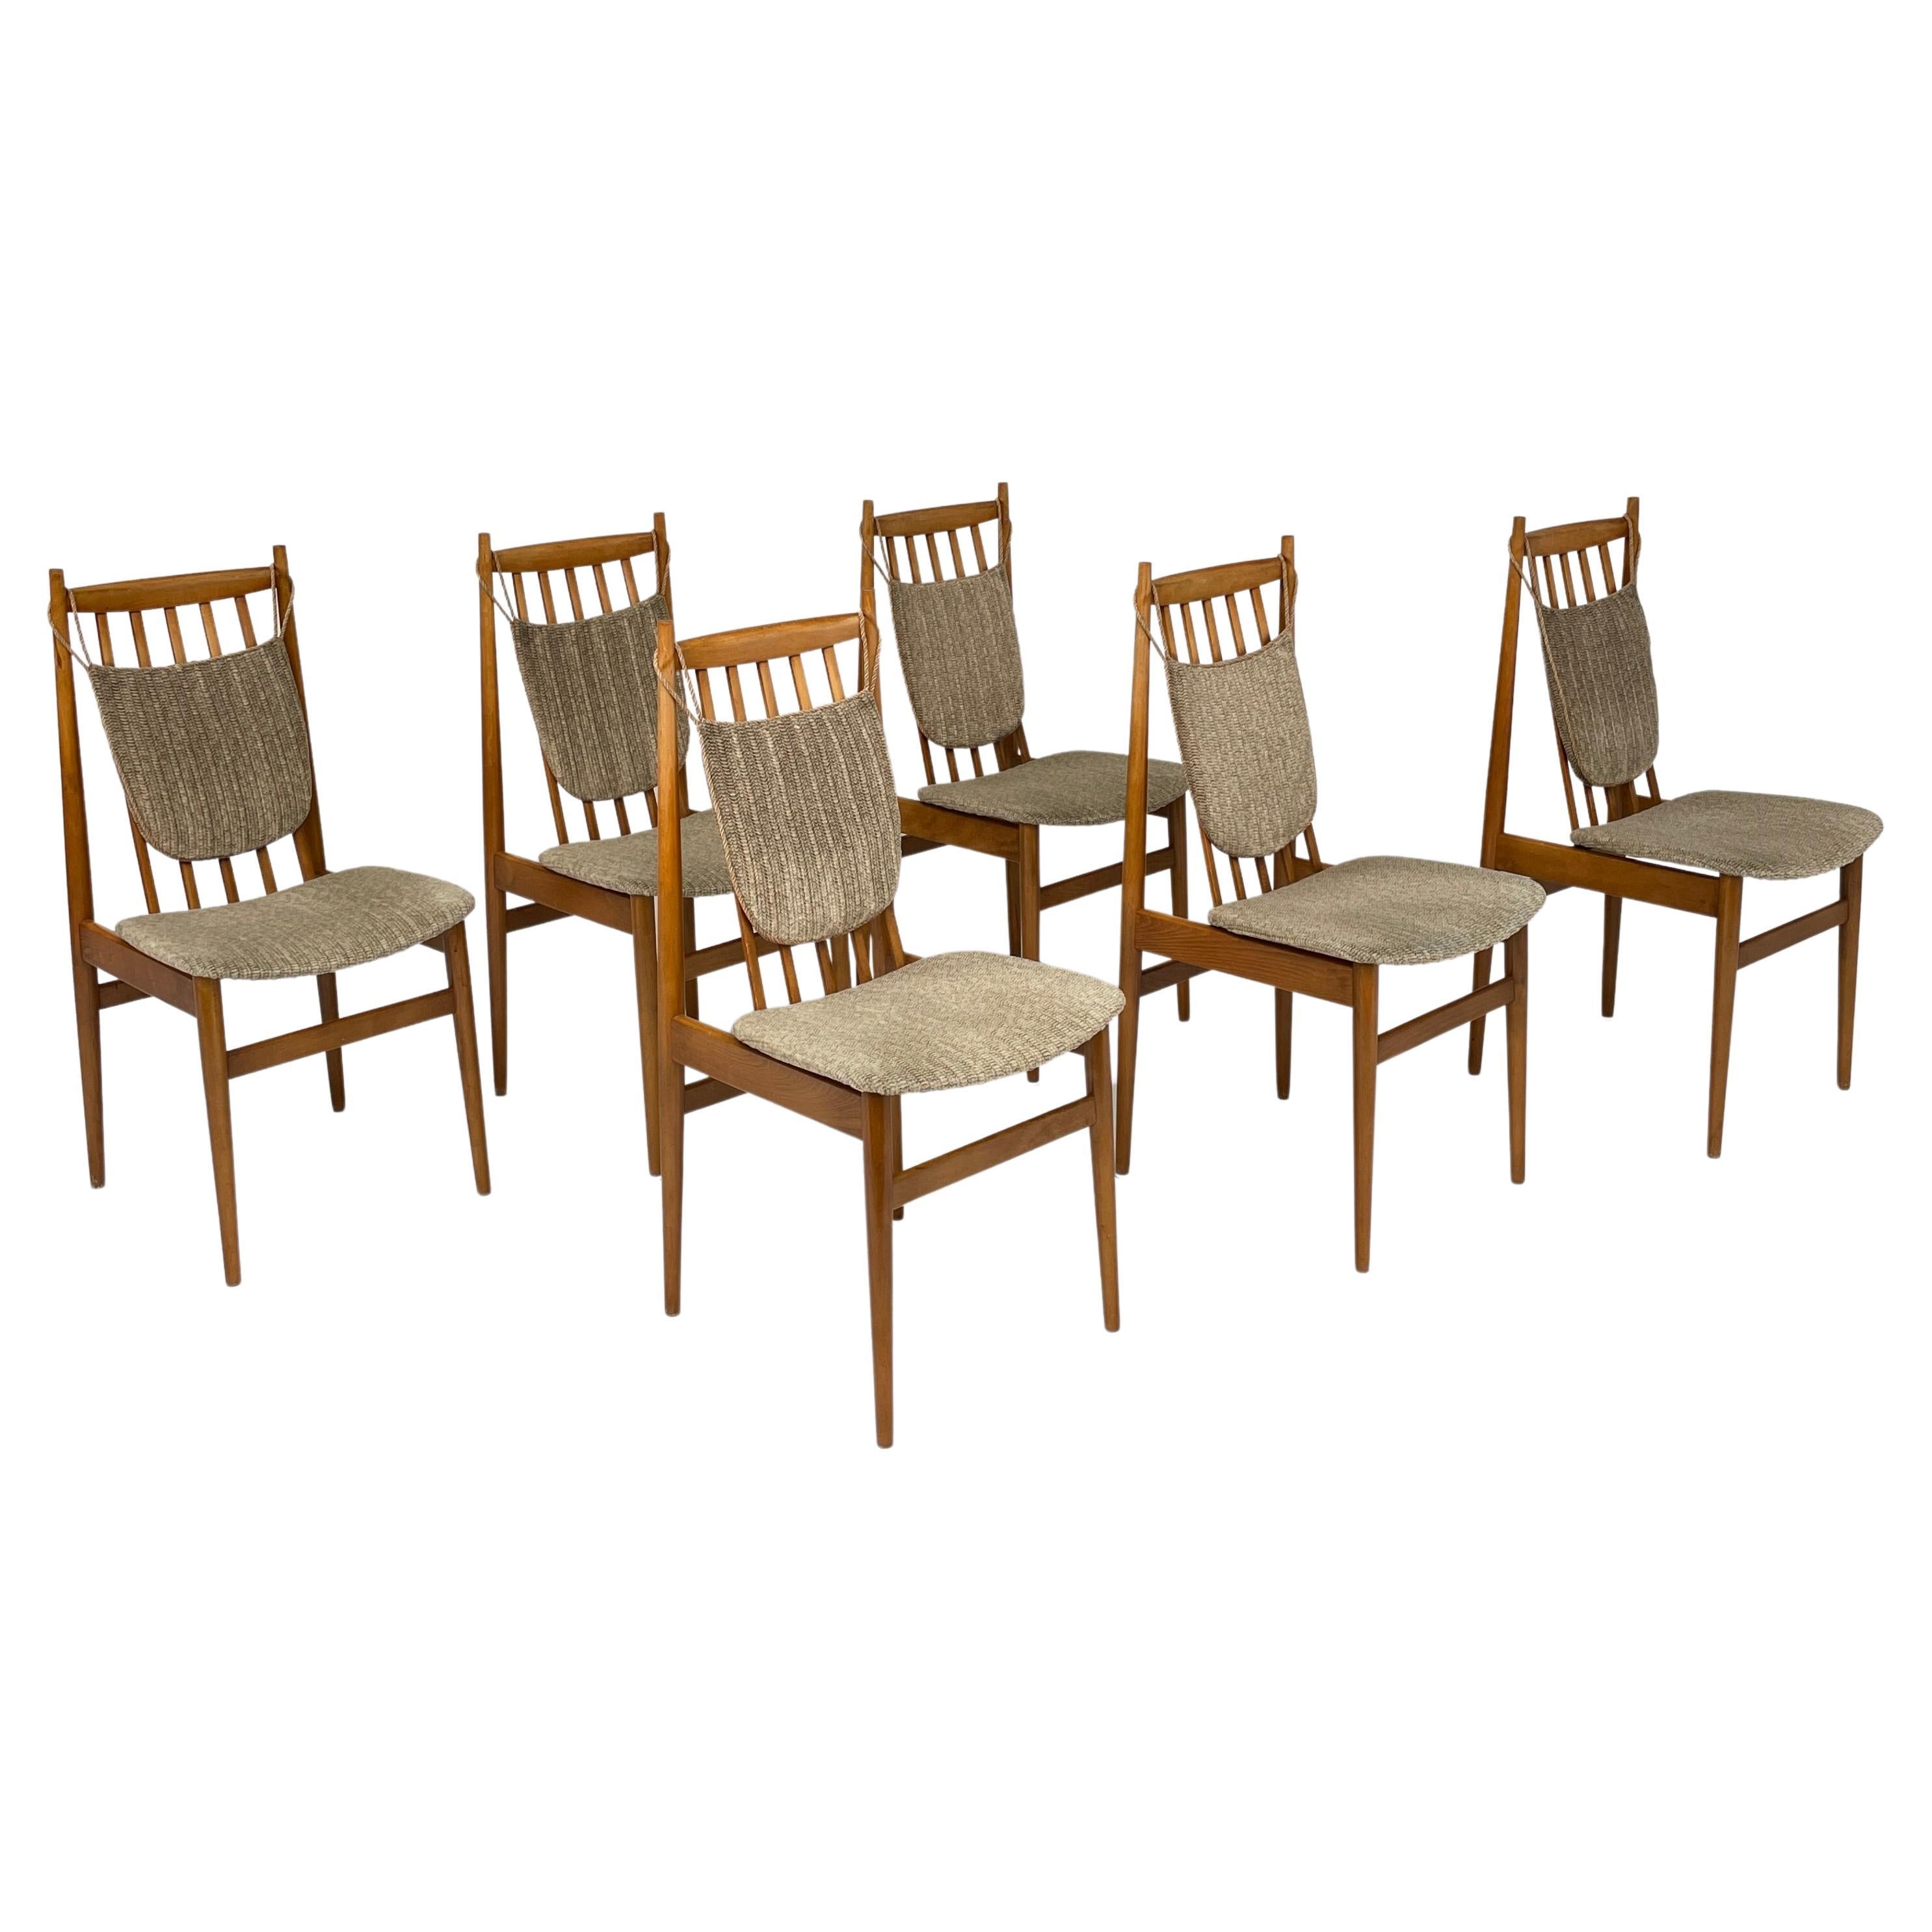 6 Vintage Chairs by Casala